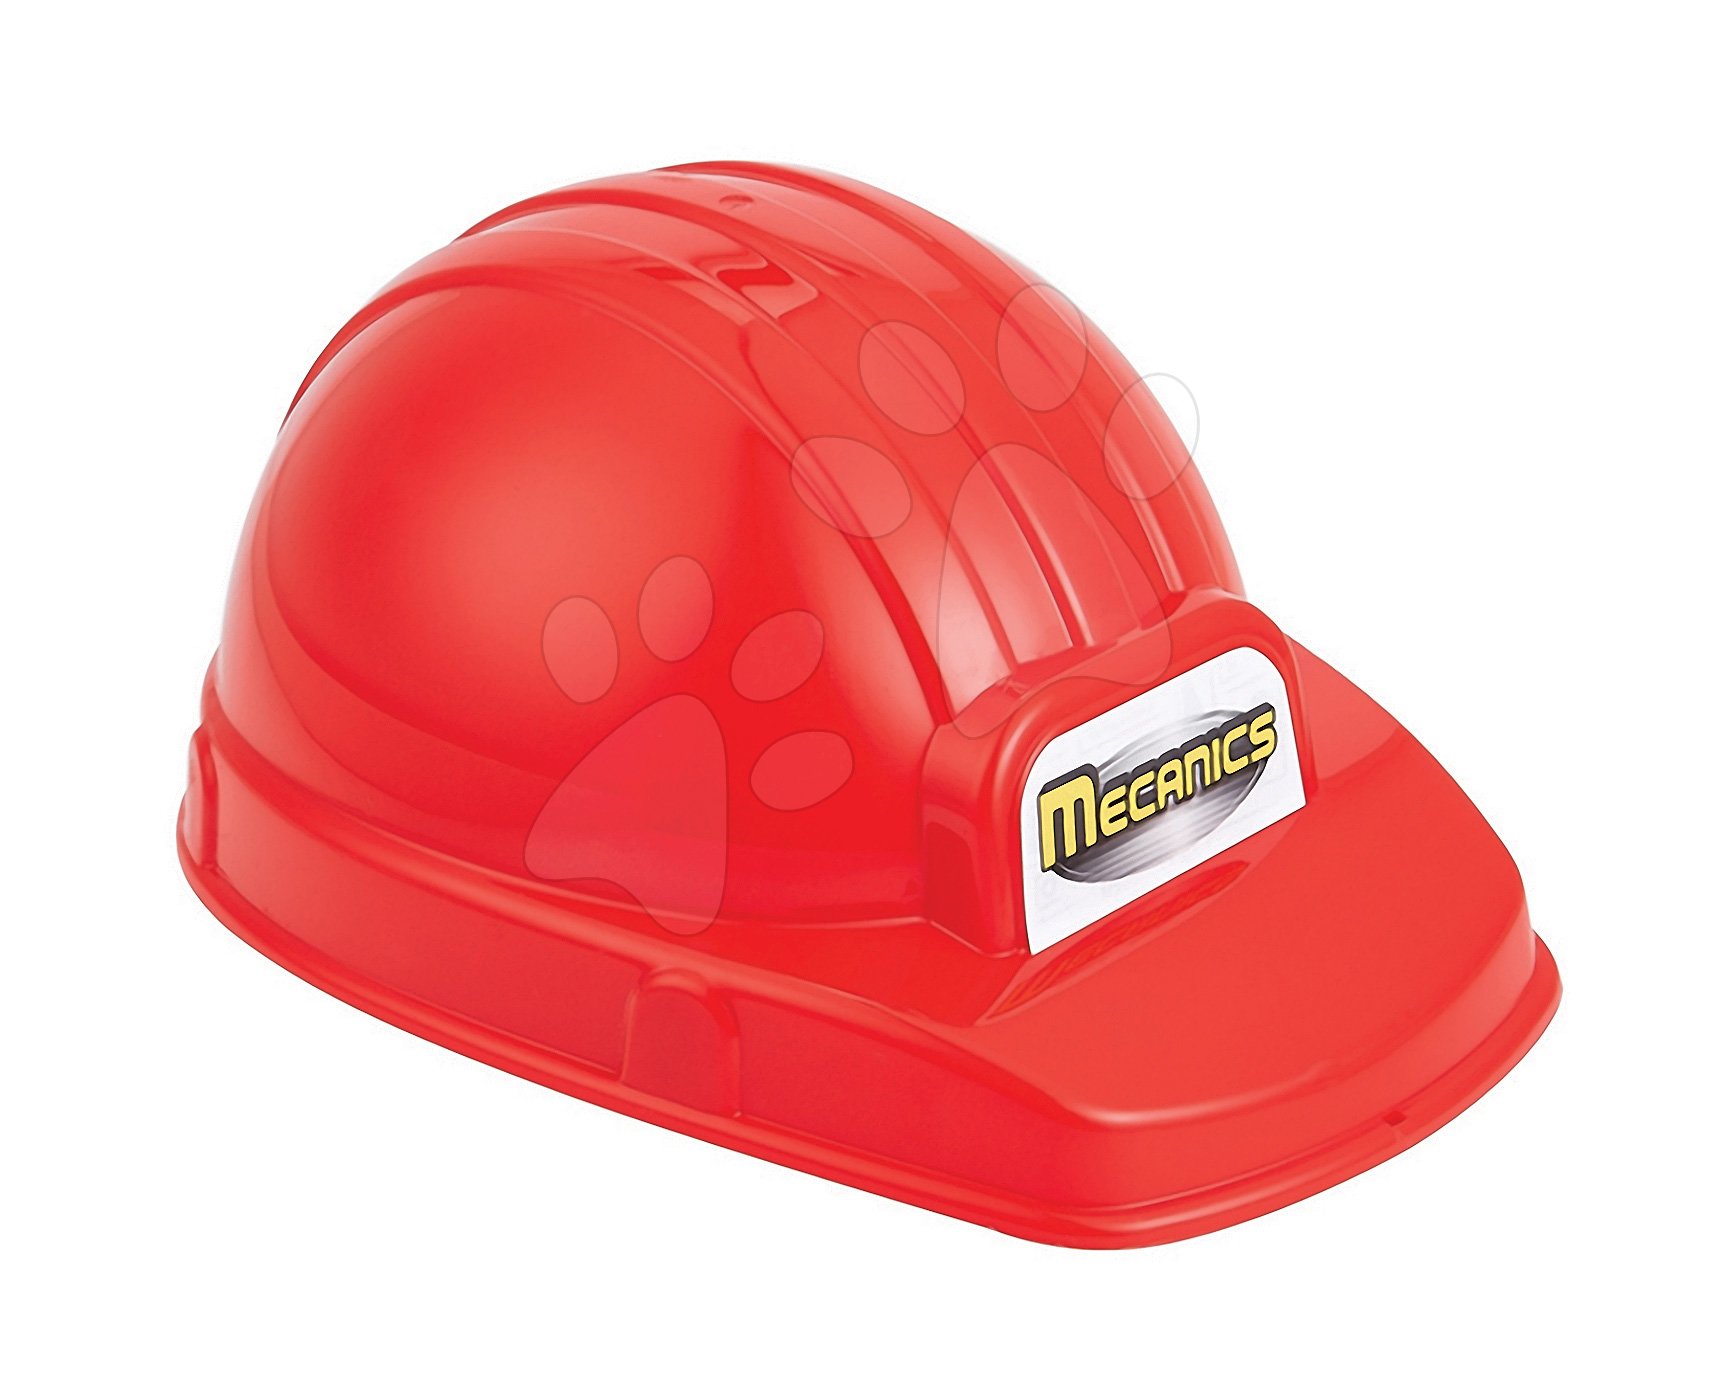 Play tools - Mecanique Écoiffier Work Helmet red, 18 months and over